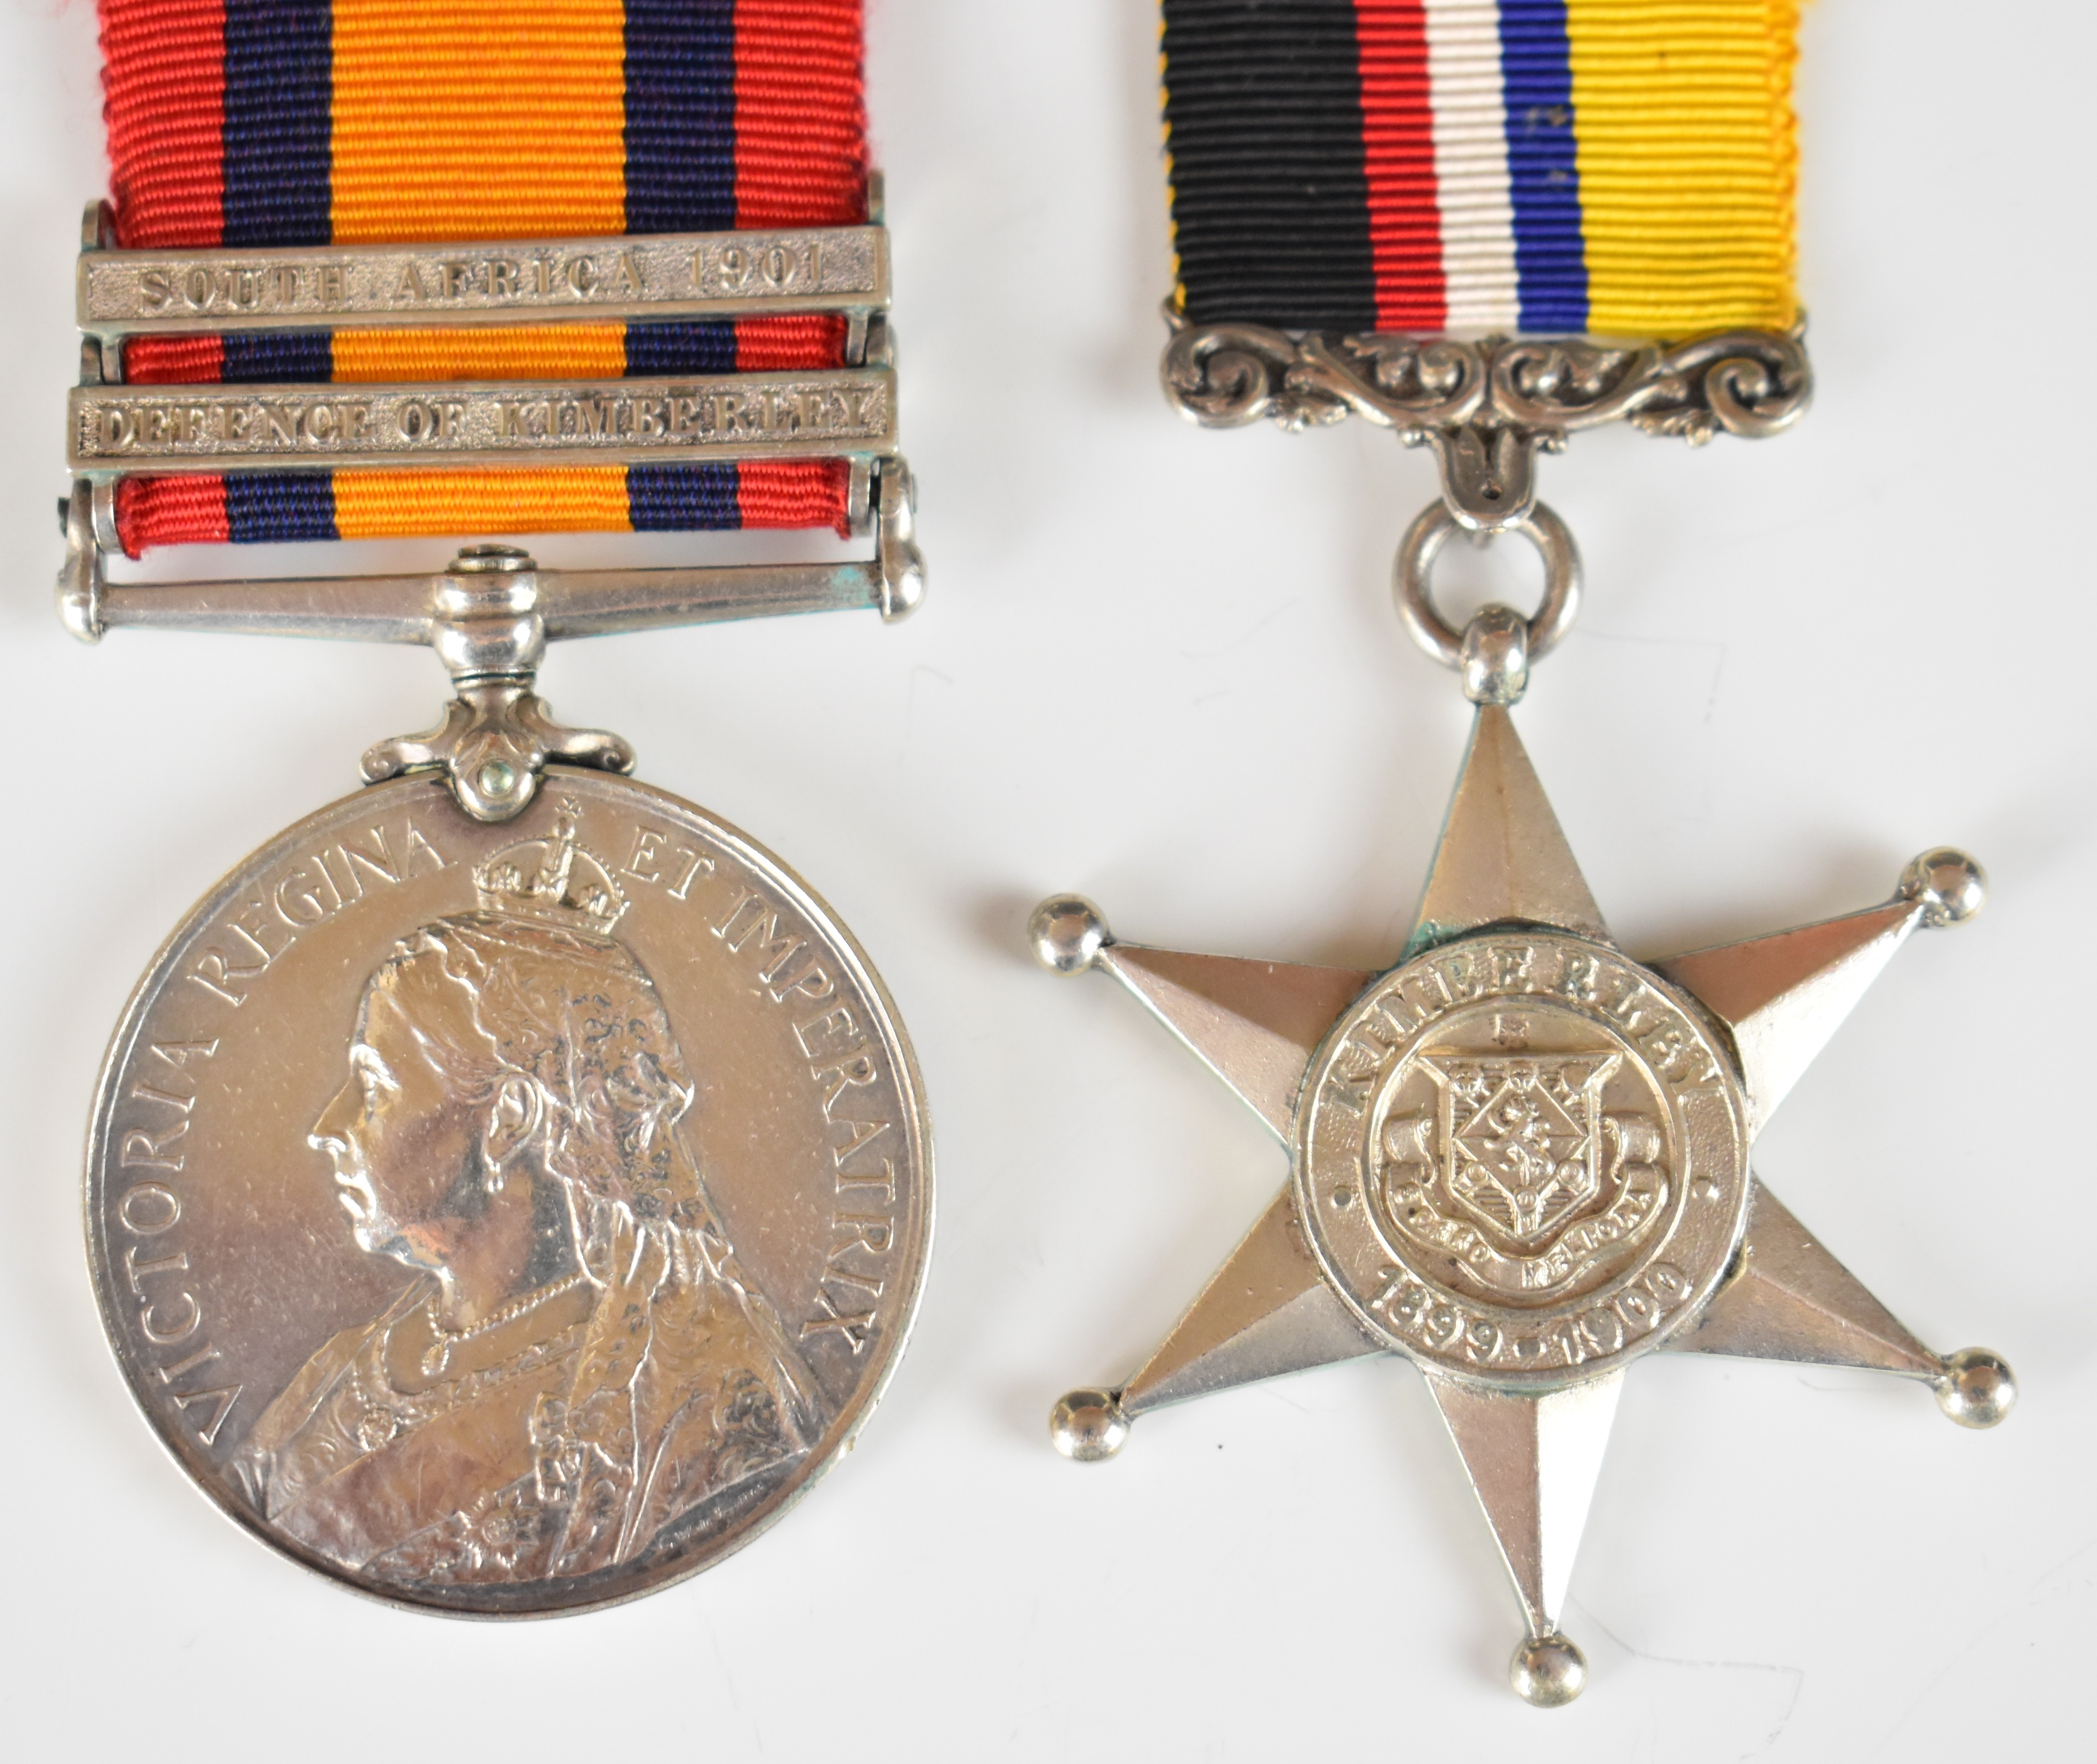 Queen's South Africa Medal with clasps for Defence of Kimberley and South Africa 1901 named to 828 - Image 2 of 22